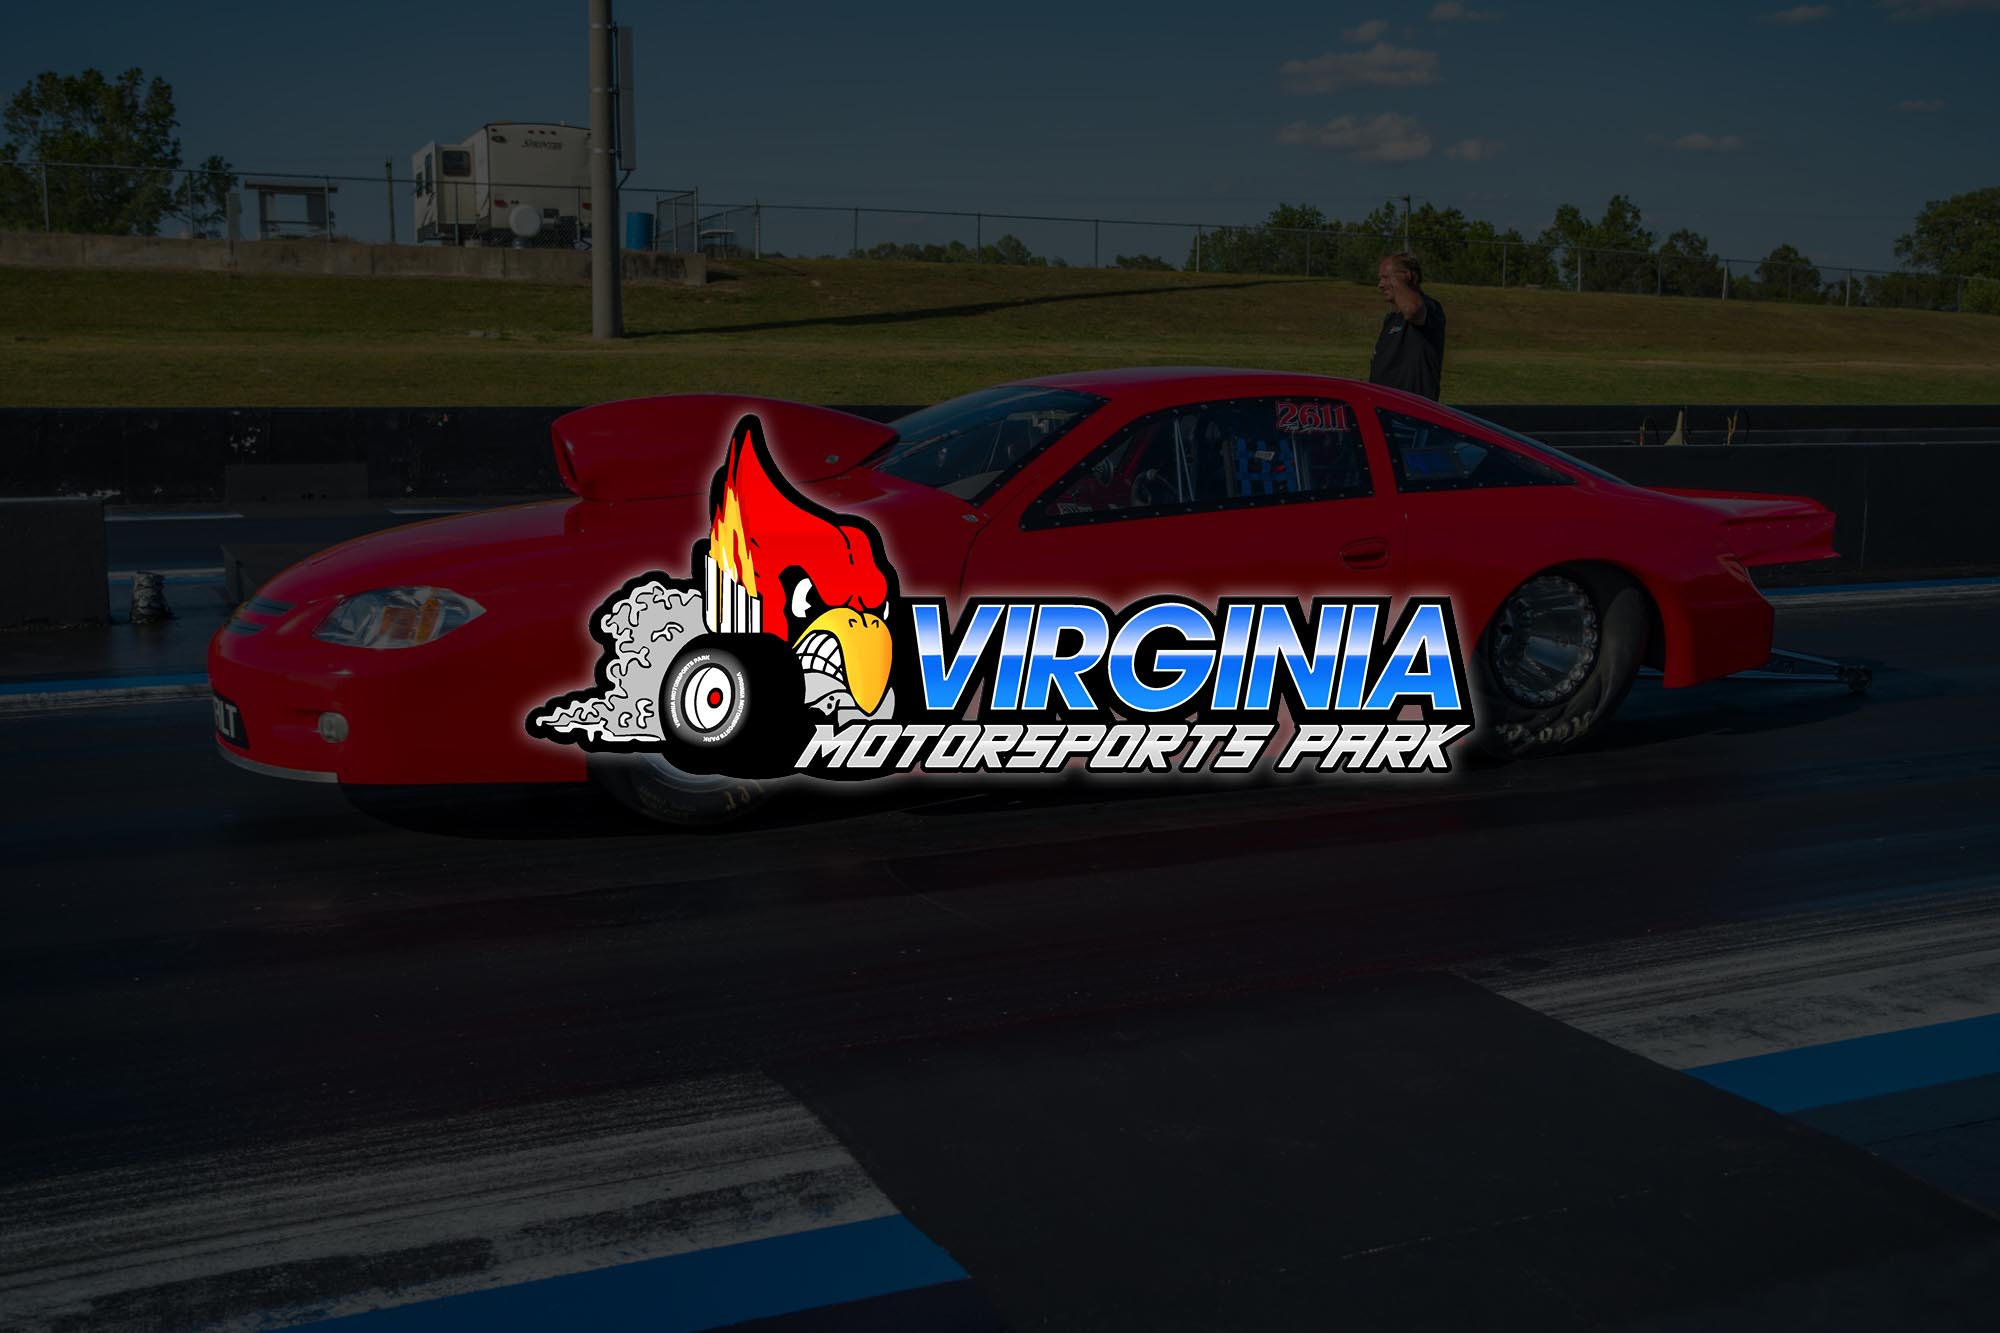 May 17-24 Update from Virginia Motorsports Park